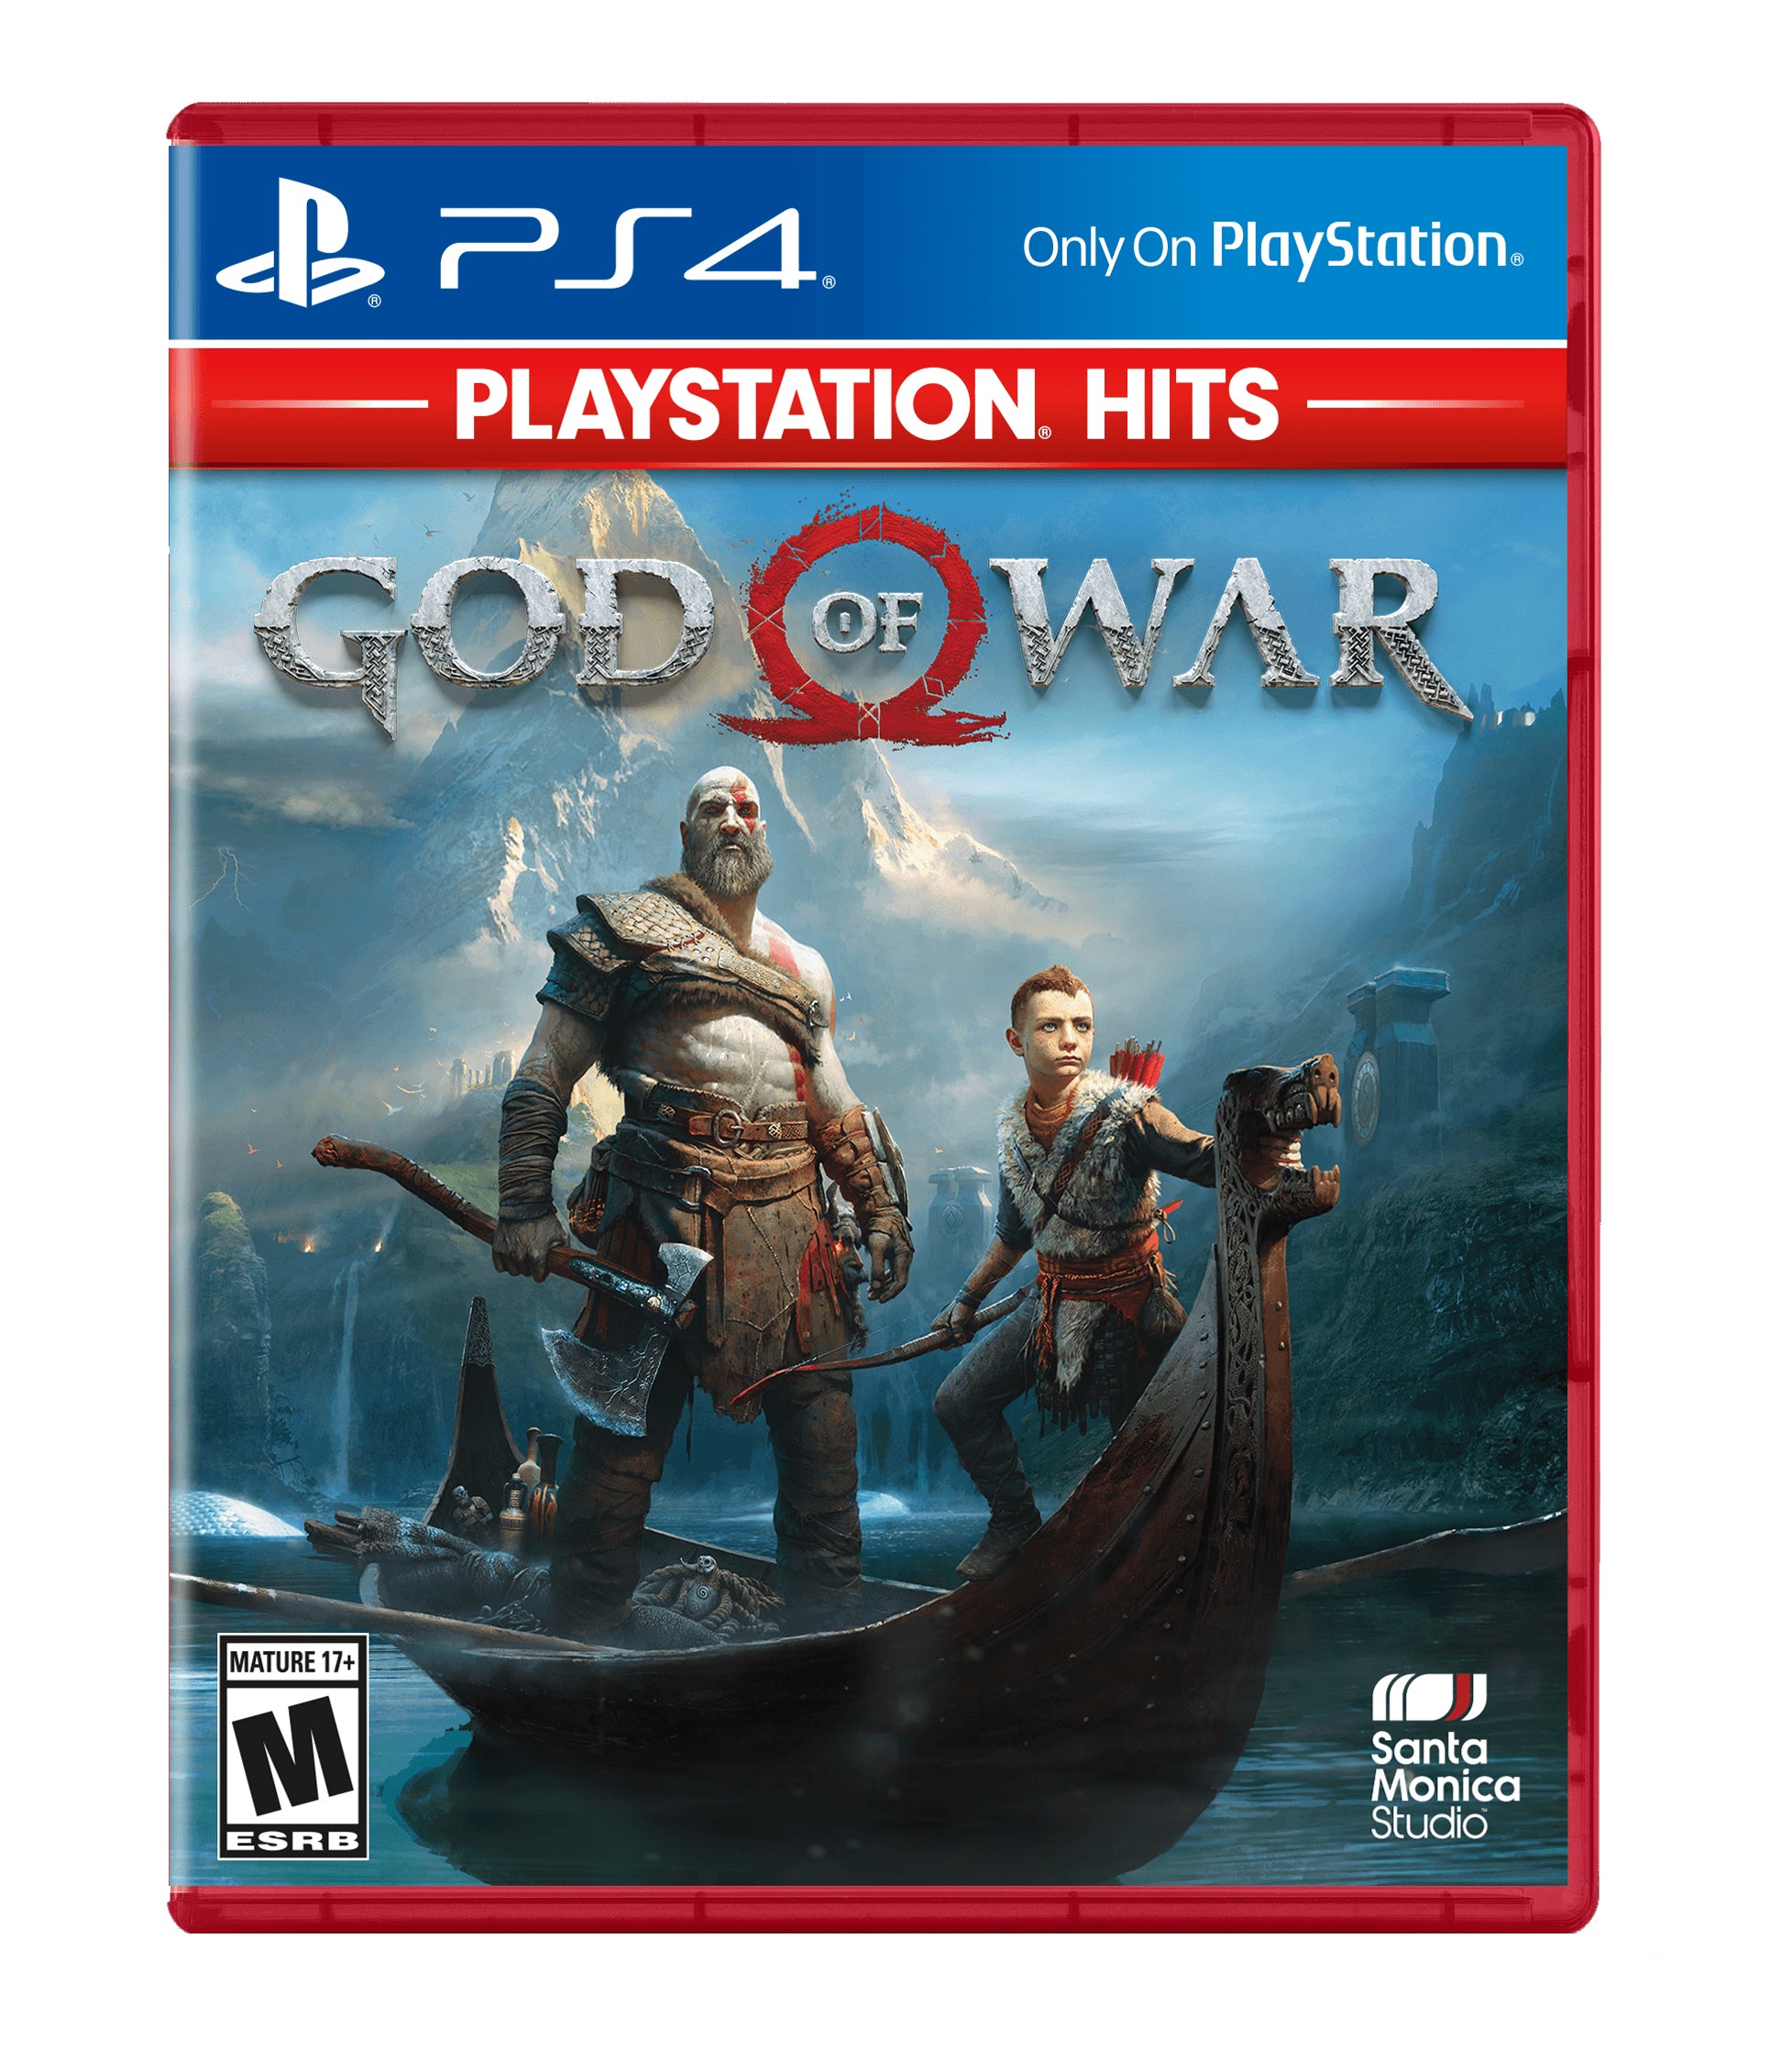 Sony PlayStation 4 Slim God of War PlayStation Hits Bundle Upgrade 2TB HDD PS4 Gaming Console, Jet Black, with Mytrix Chat Headset - Large Capacity Internal Hard Drive Enhanced PS4 Console